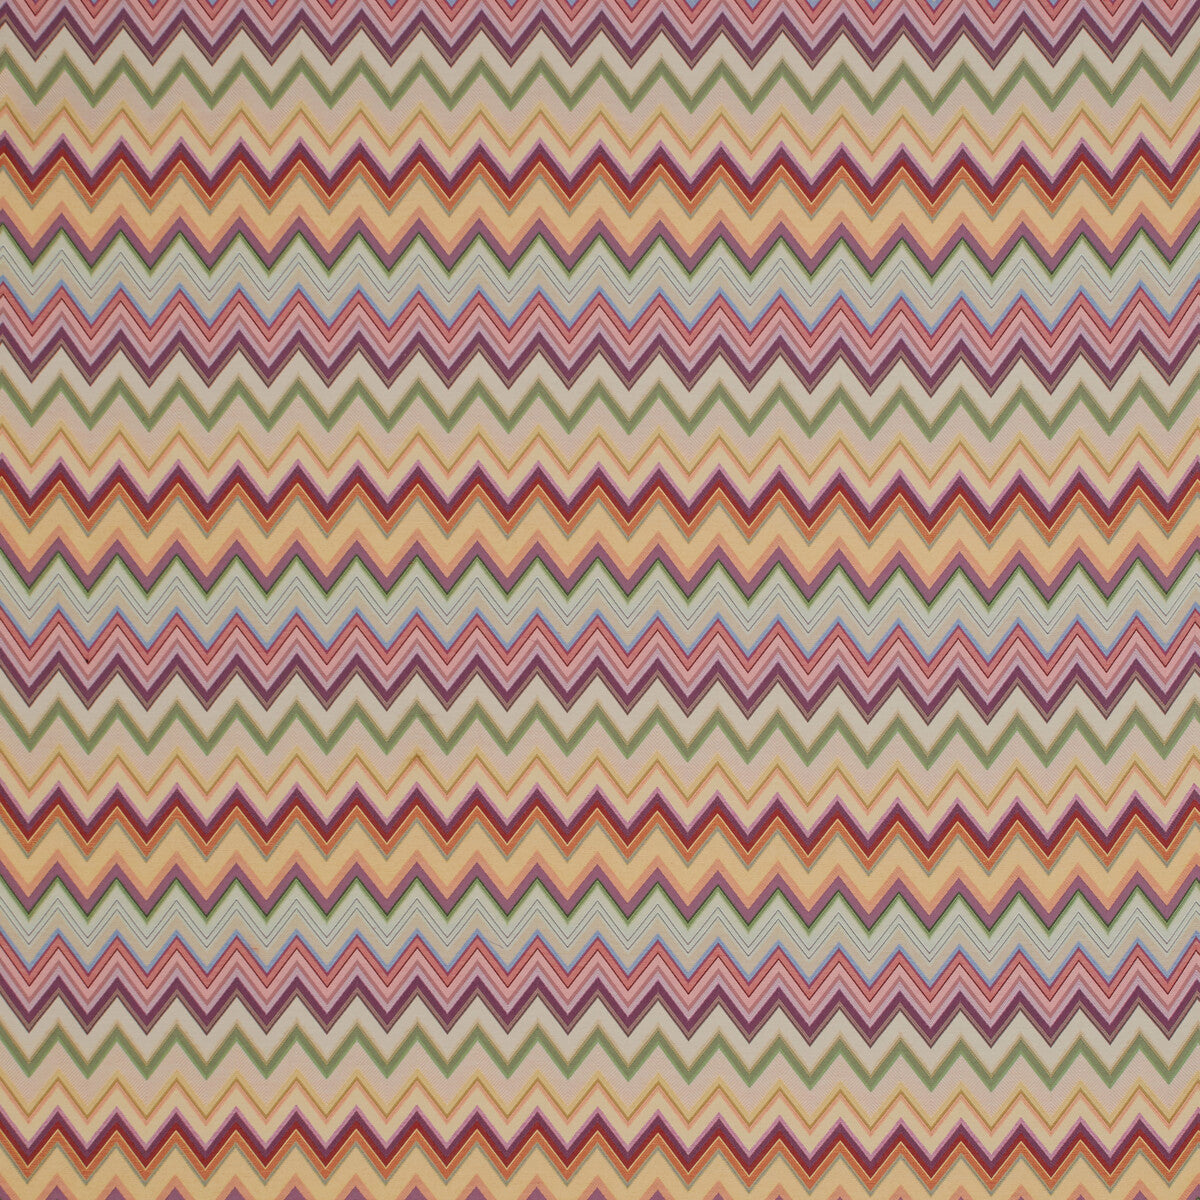 Agadir fabric in 159 color - pattern 36145.910.0 - by Kravet Couture in the Missoni Home 2021 collection